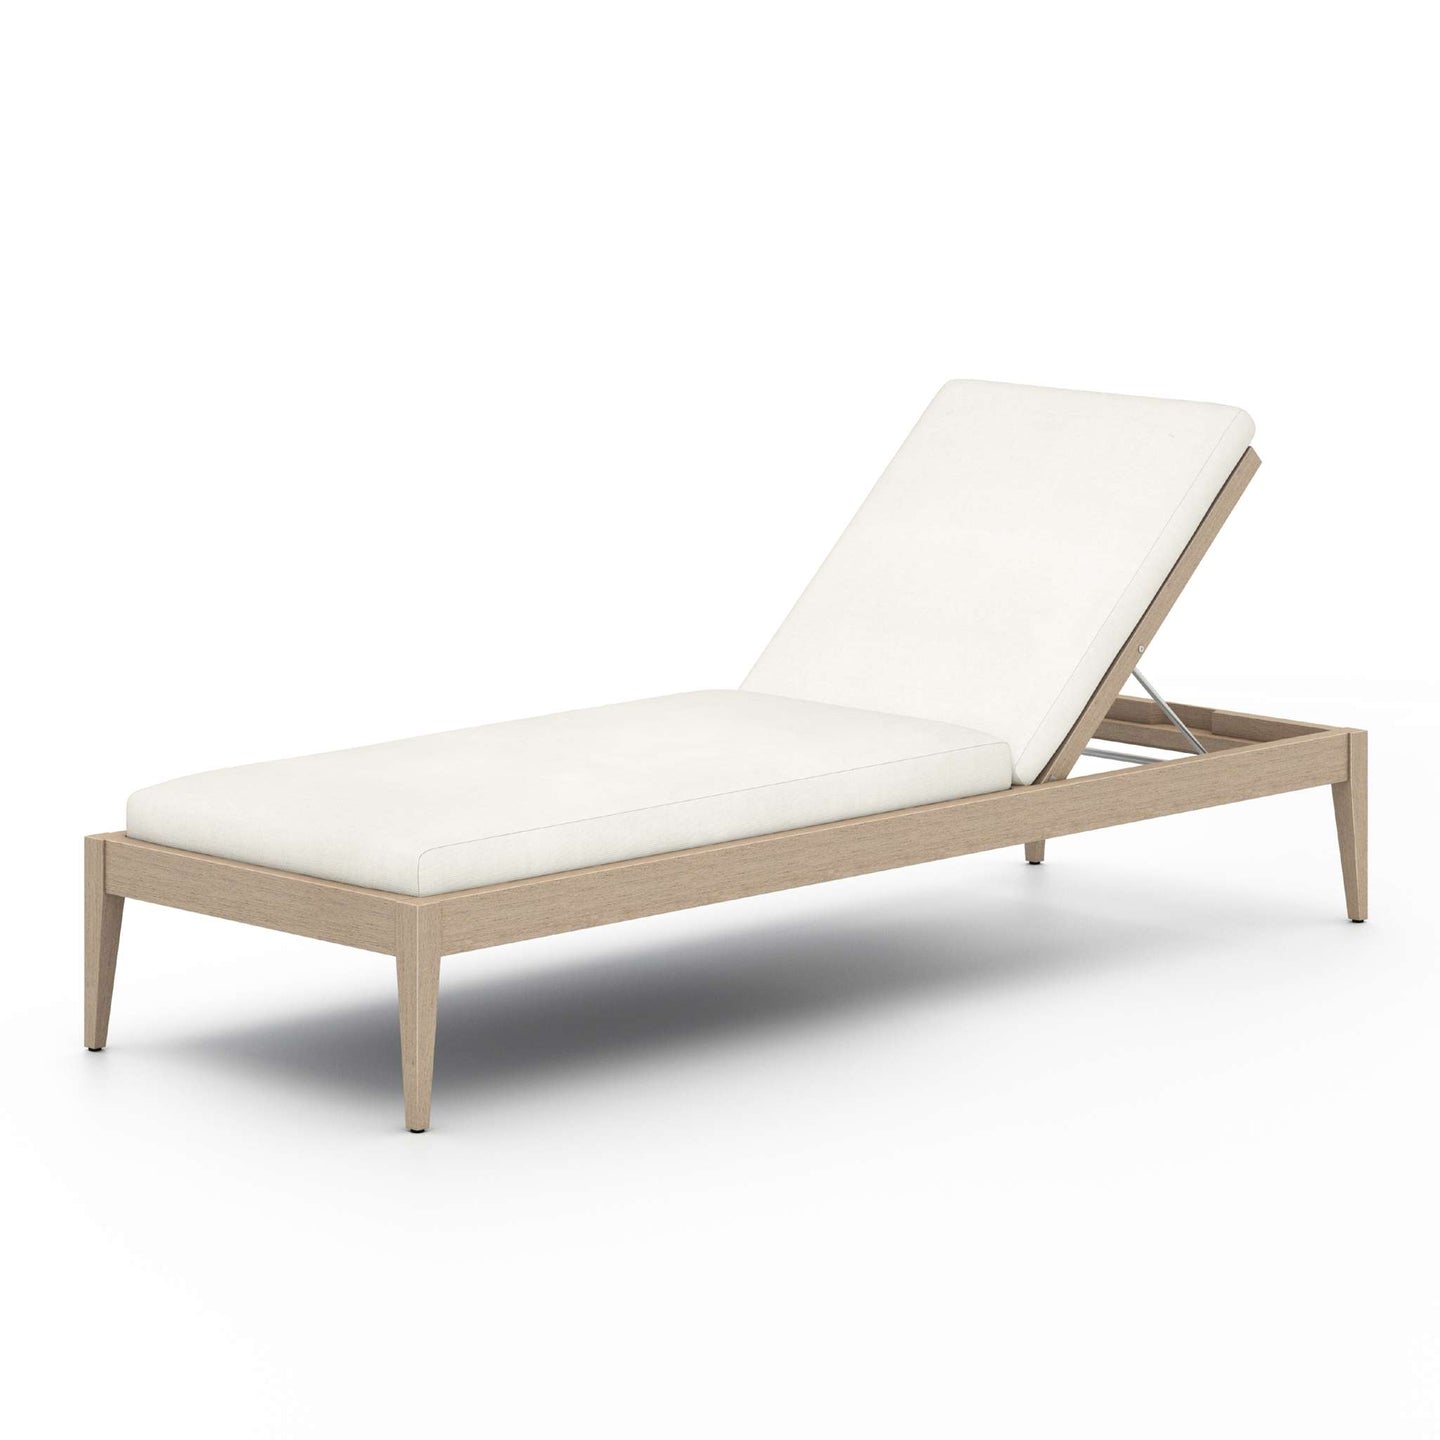 Sherwood Outdoor Chaise Lounge